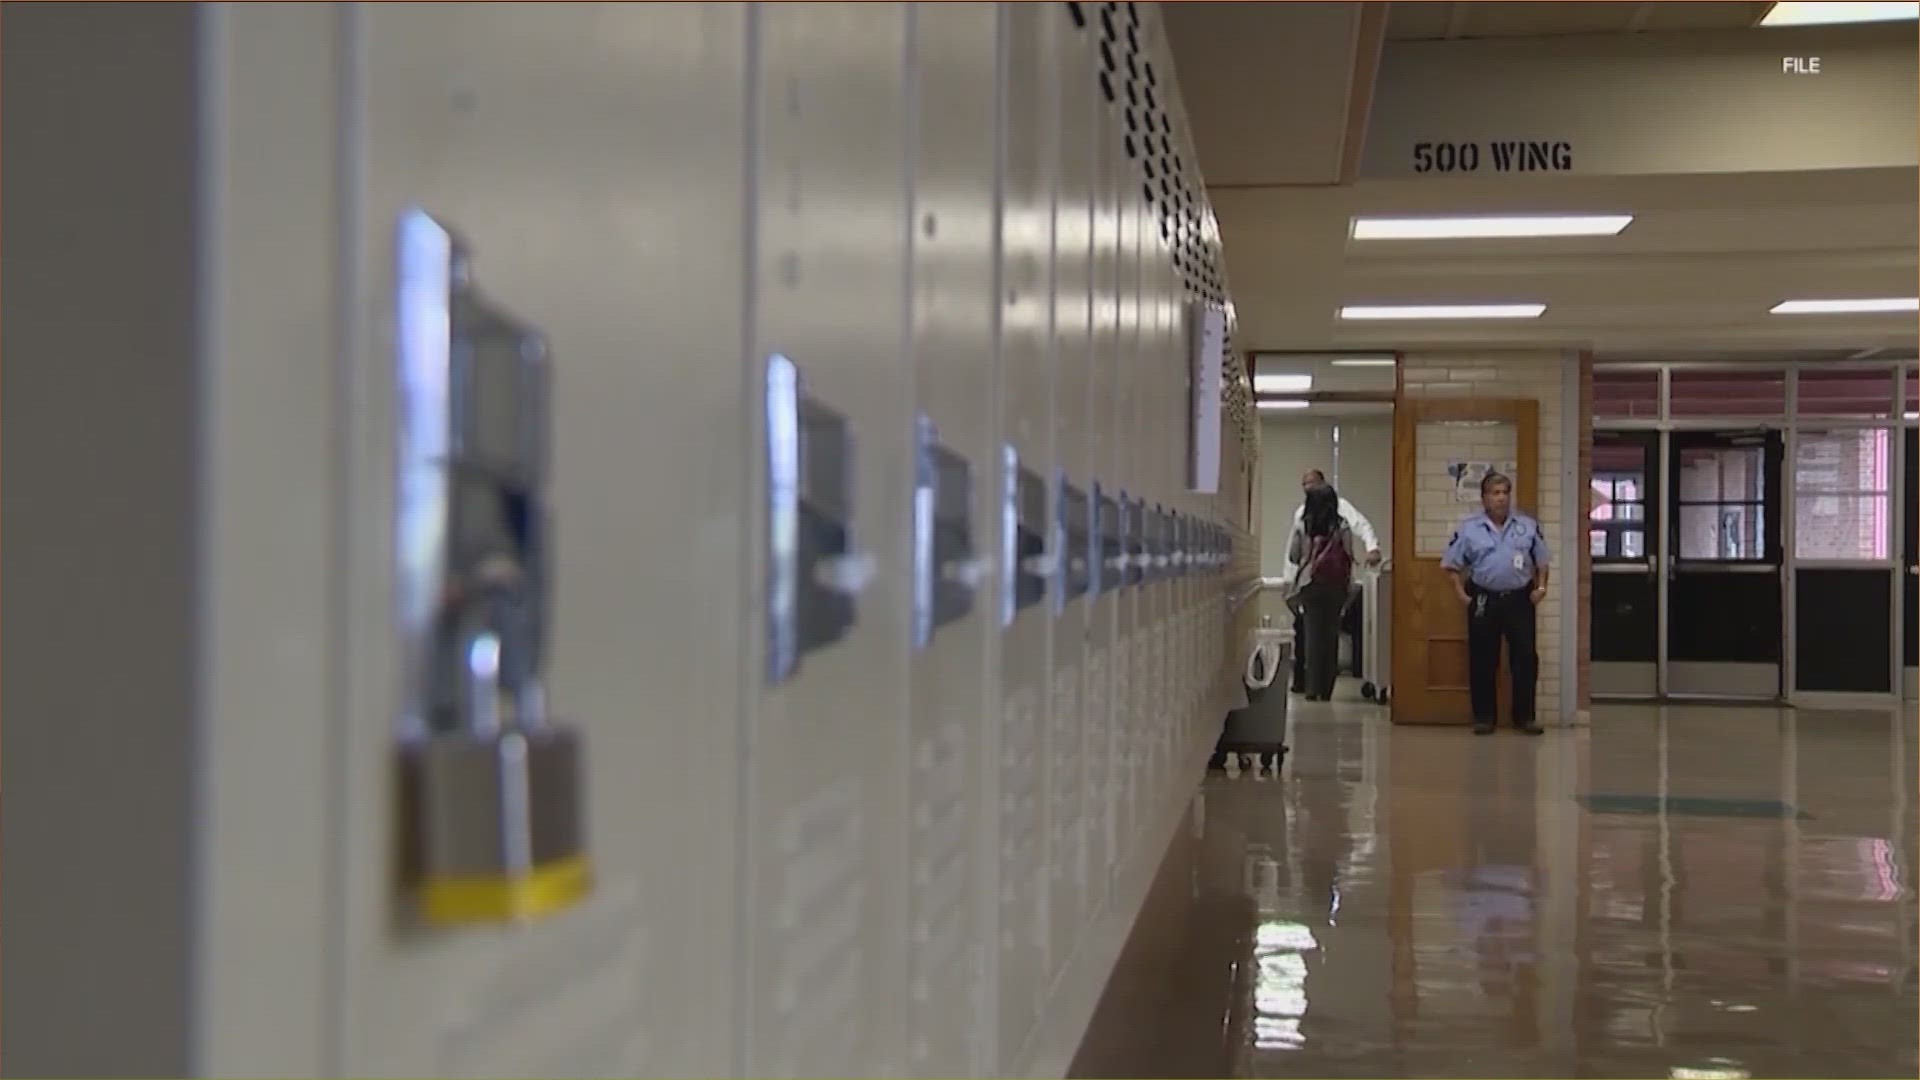 A bill filed in the Texas House would require an armed school district employee at every campus in the state.